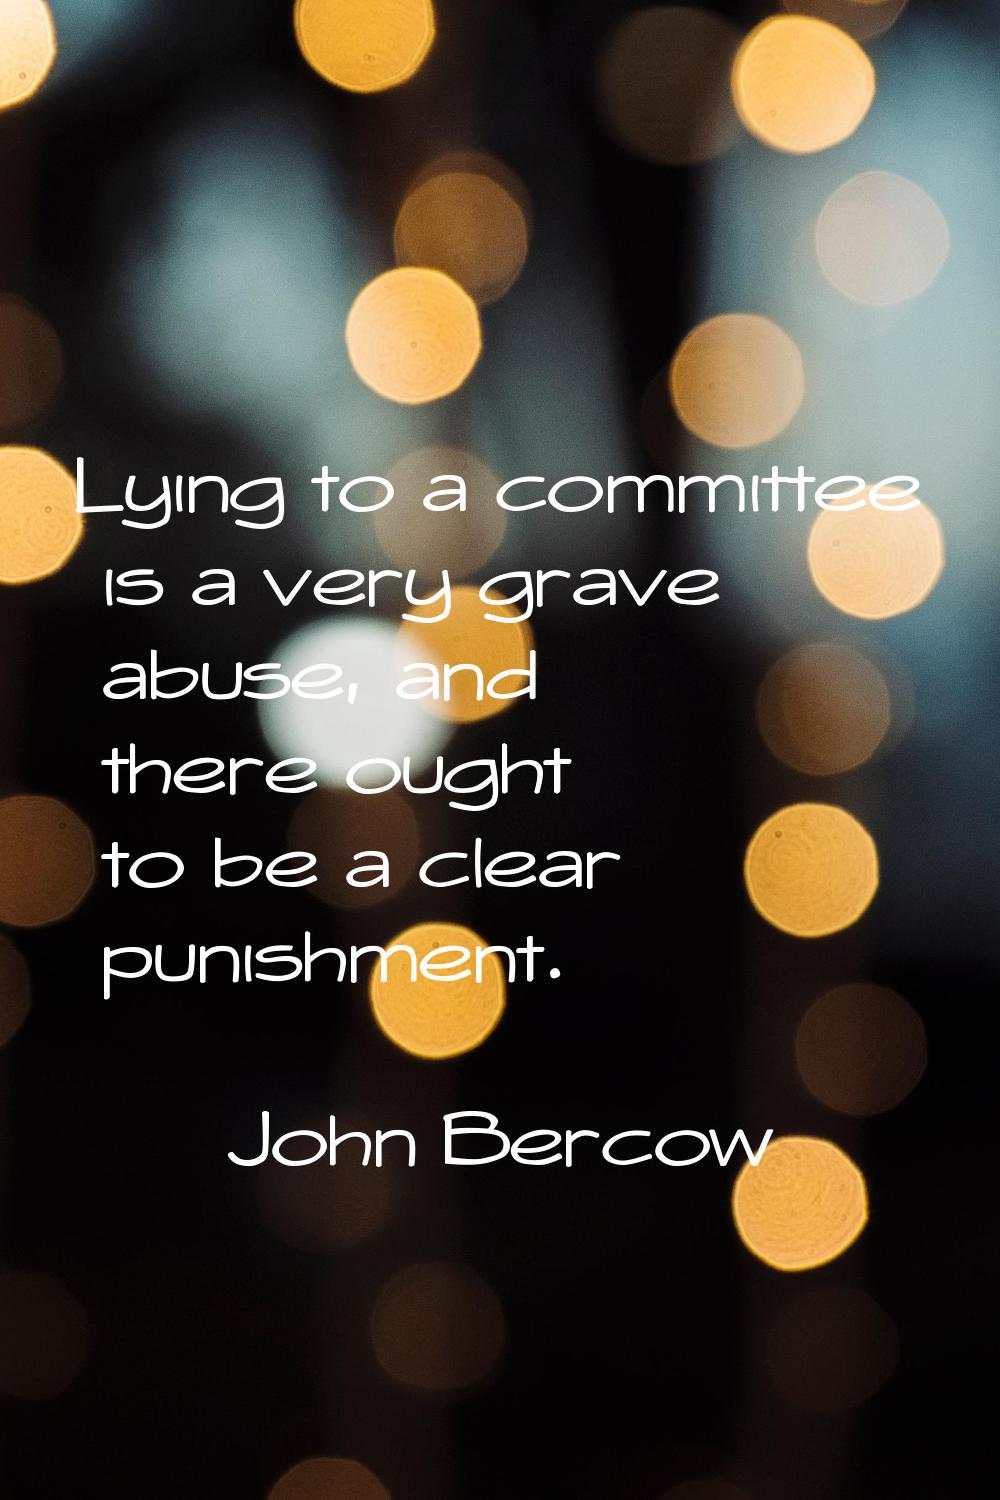 Lying to a committee is a very grave abuse, and there ought to be a clear punishment.